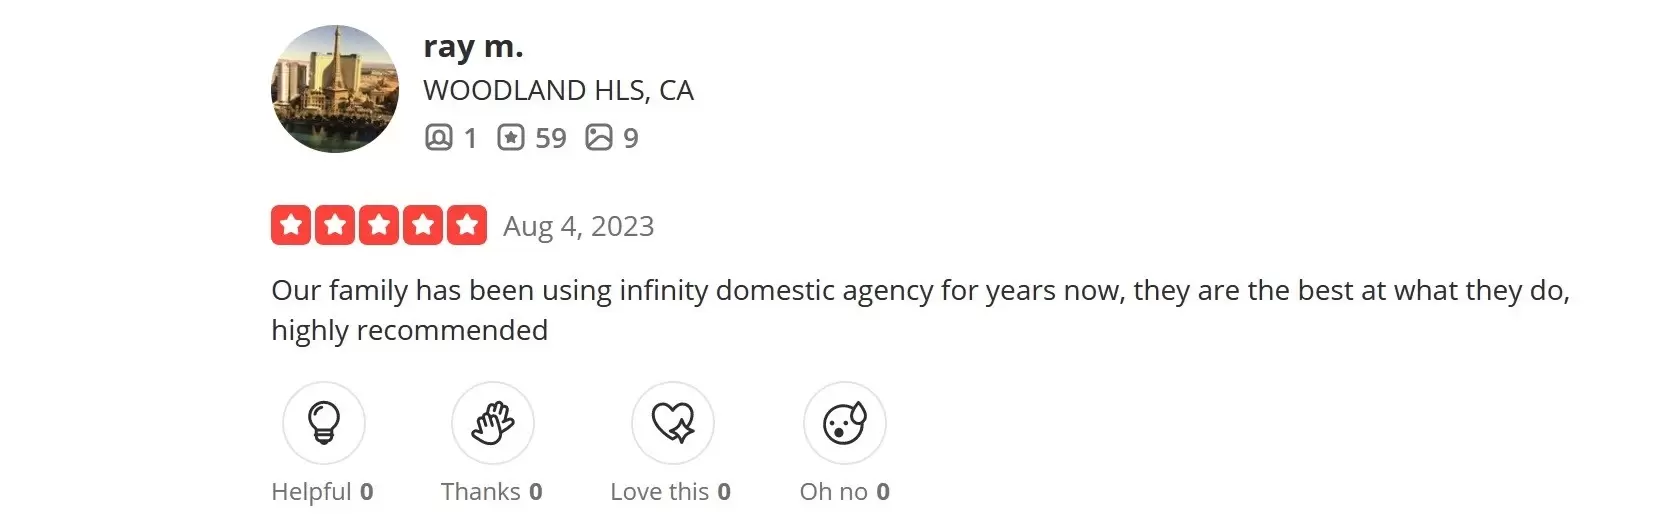 positive review of Infinity Domestic Agency